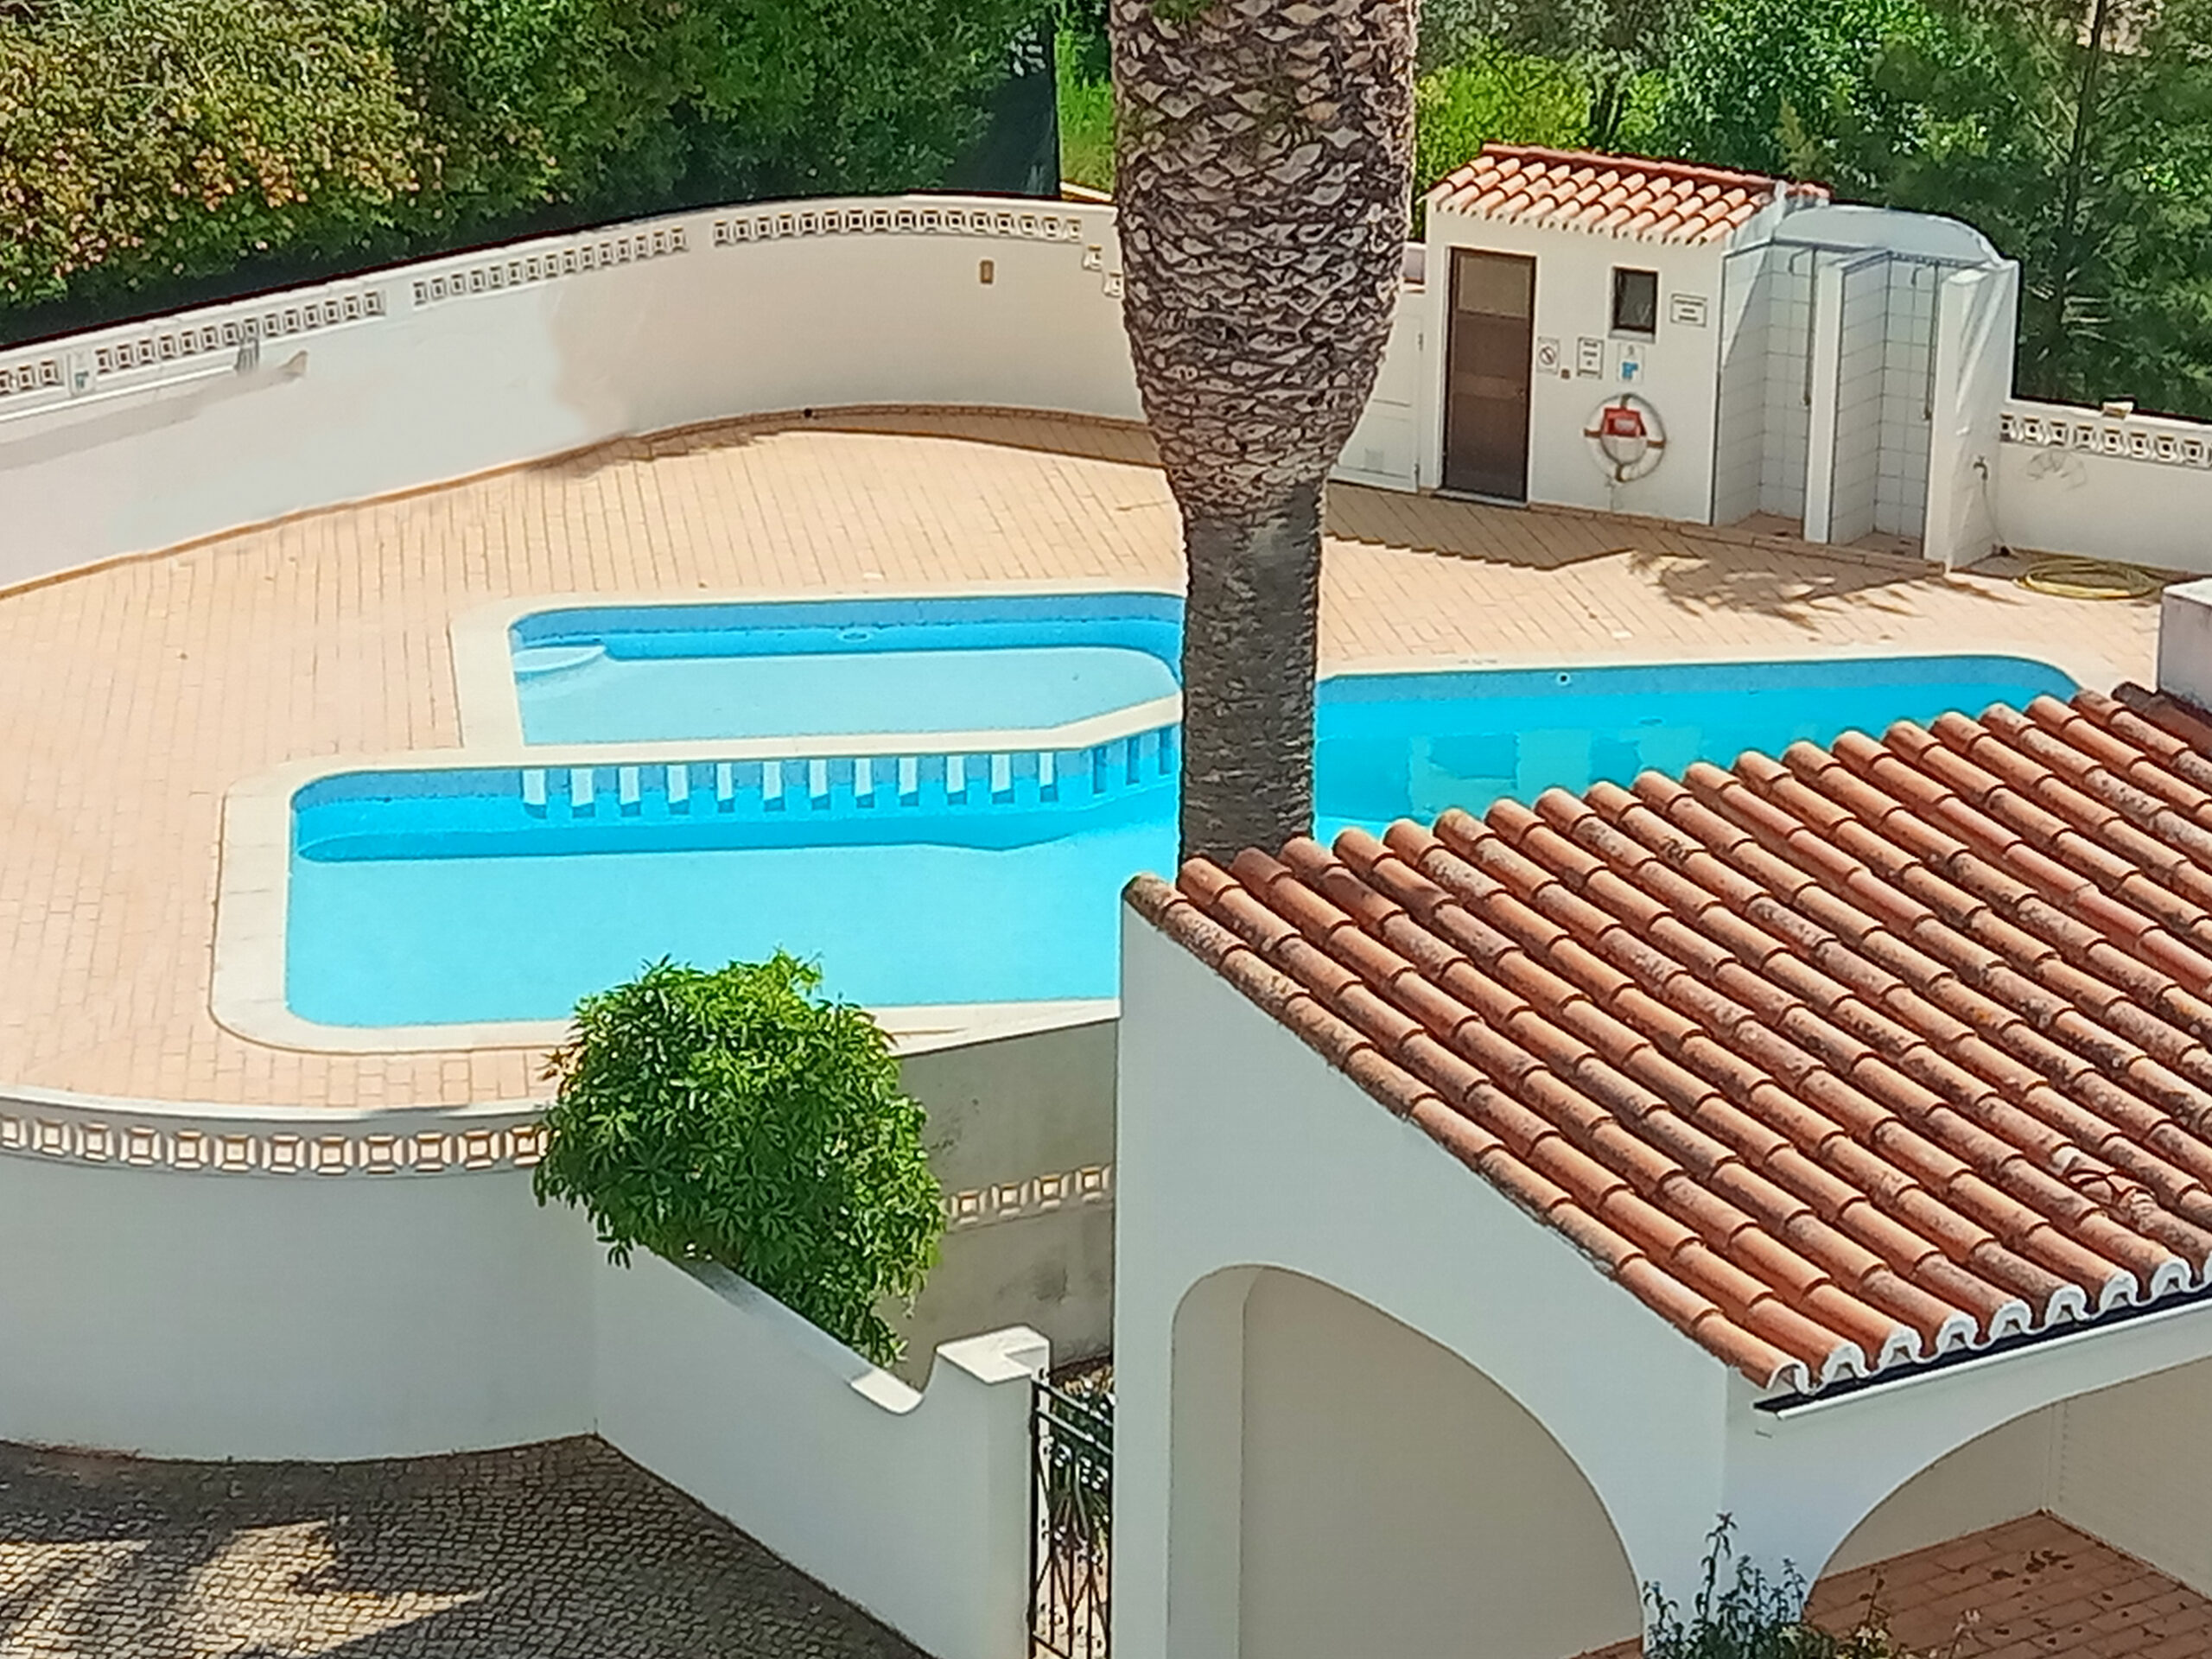 Pool area viewed from front terrace